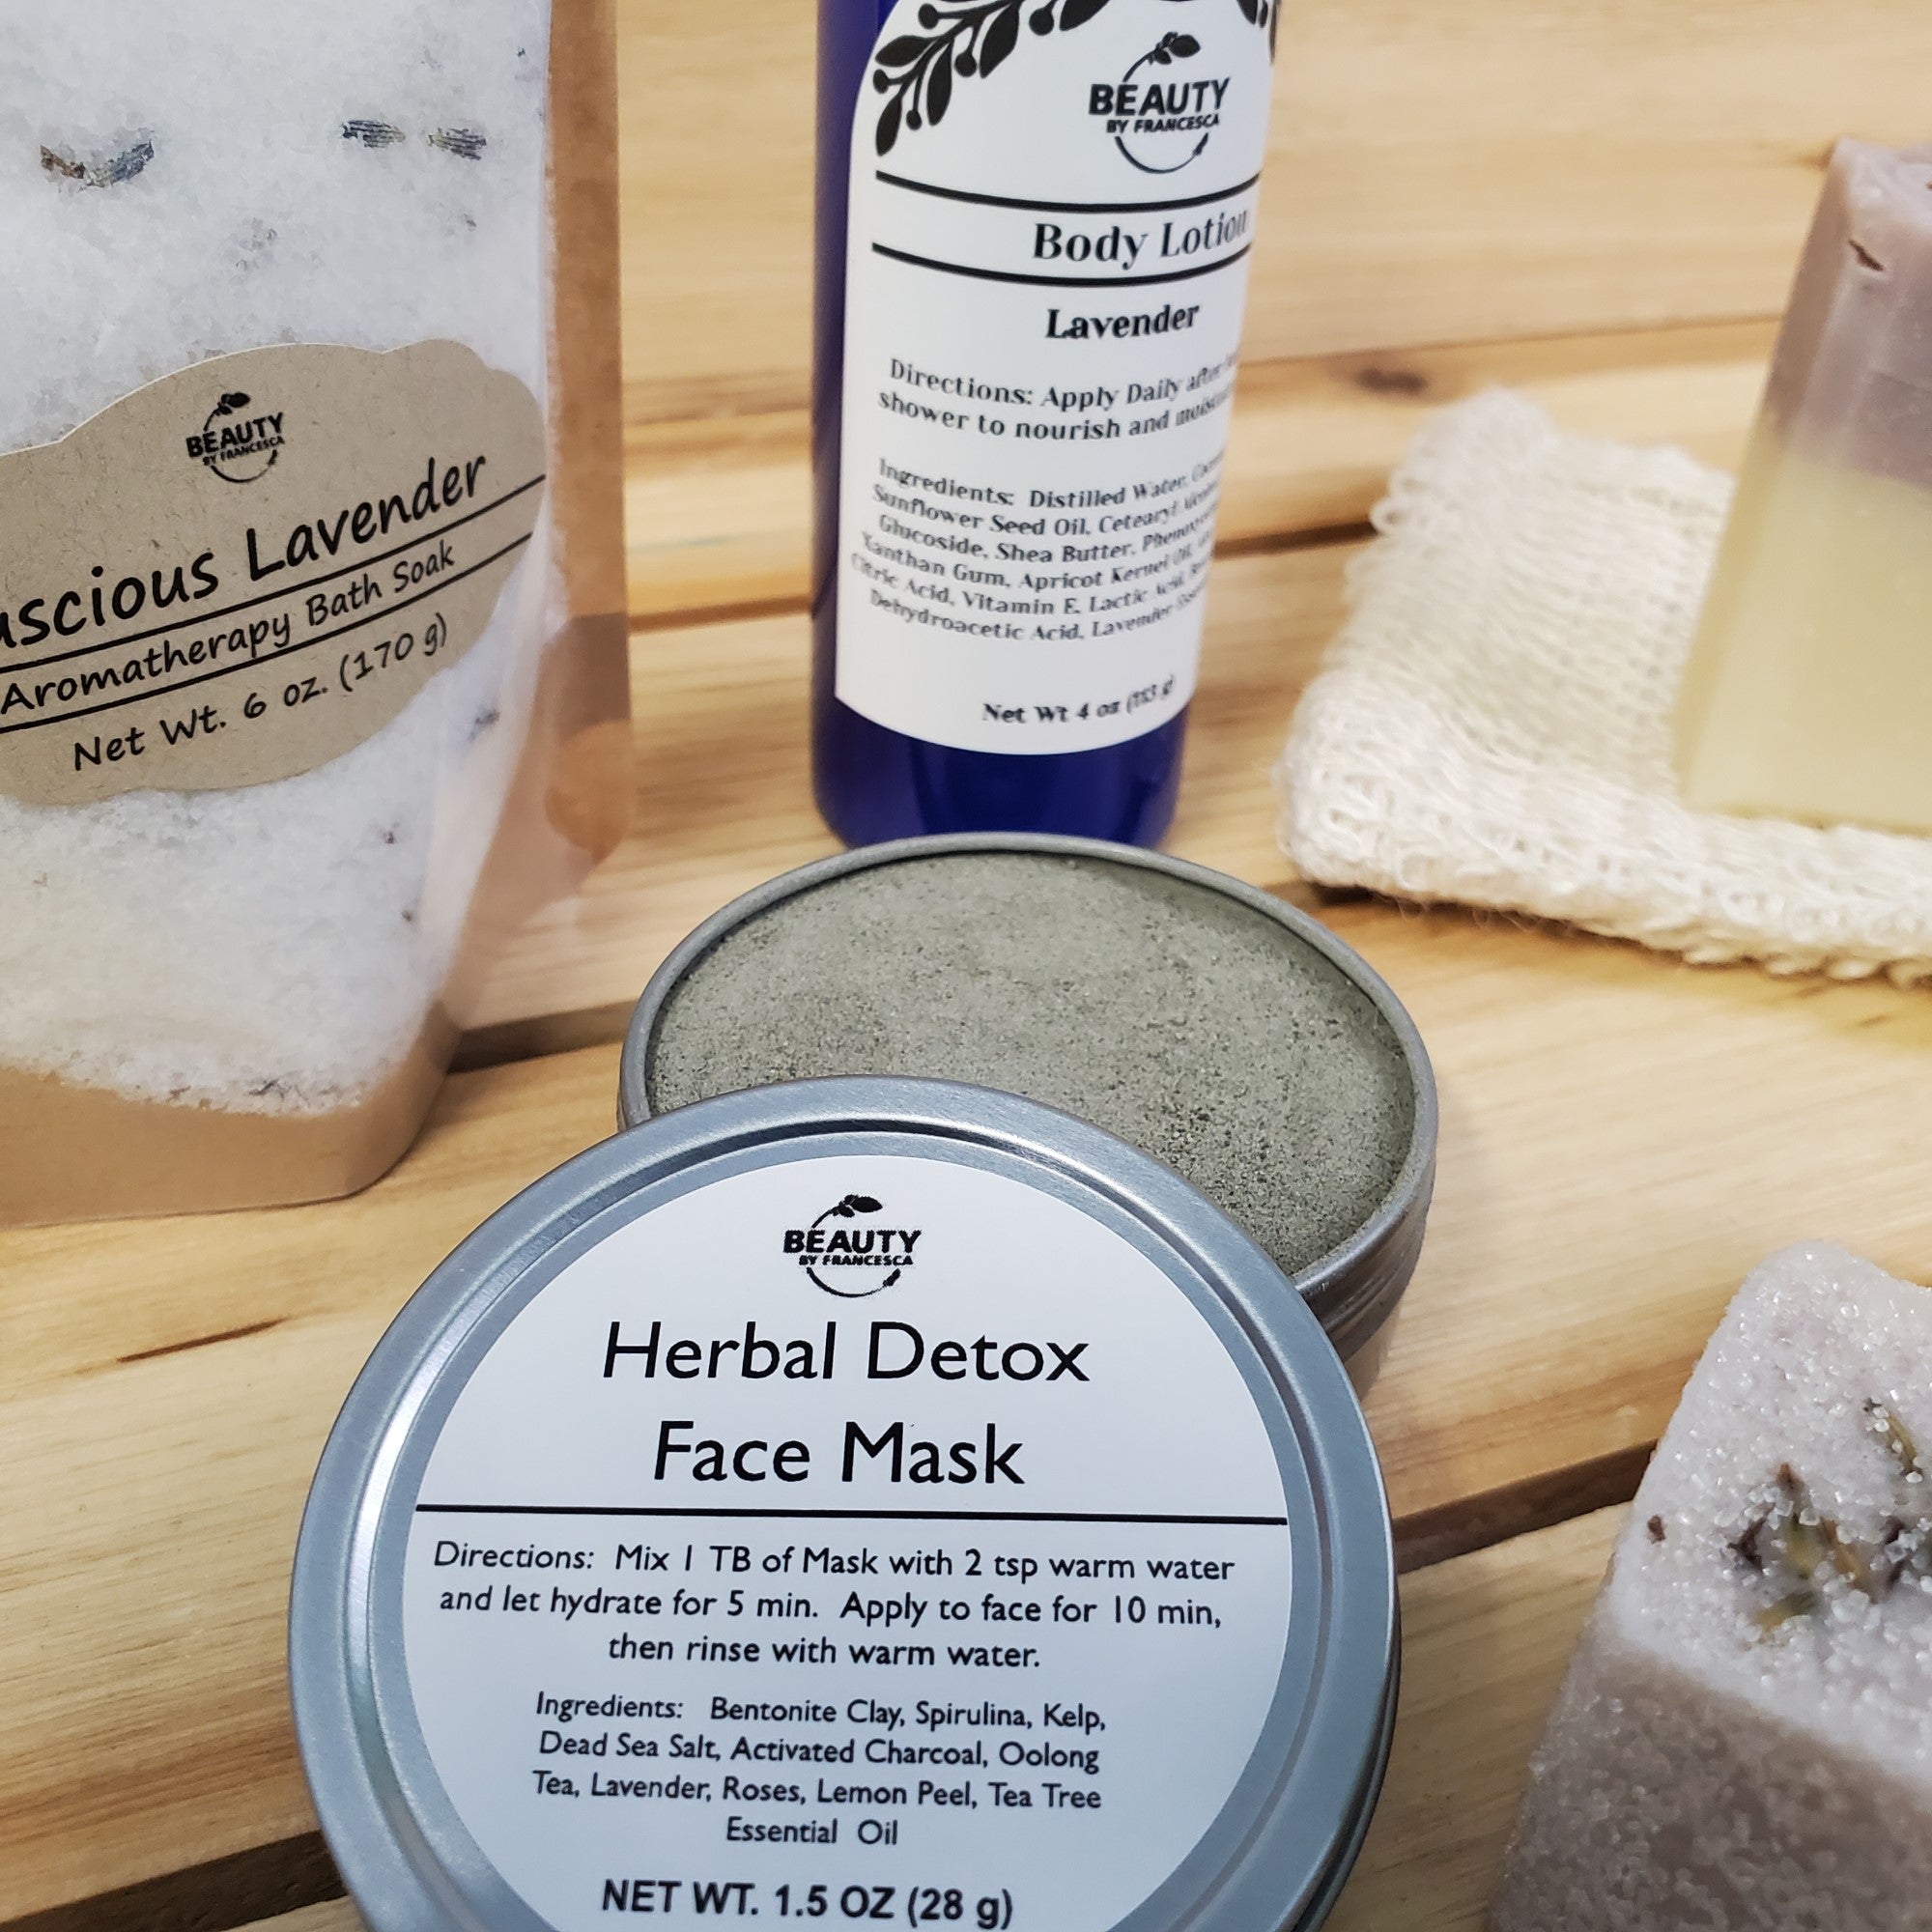 relax and unwind gift box contents face mask , luscious lavender bath salt, lavender body lotion